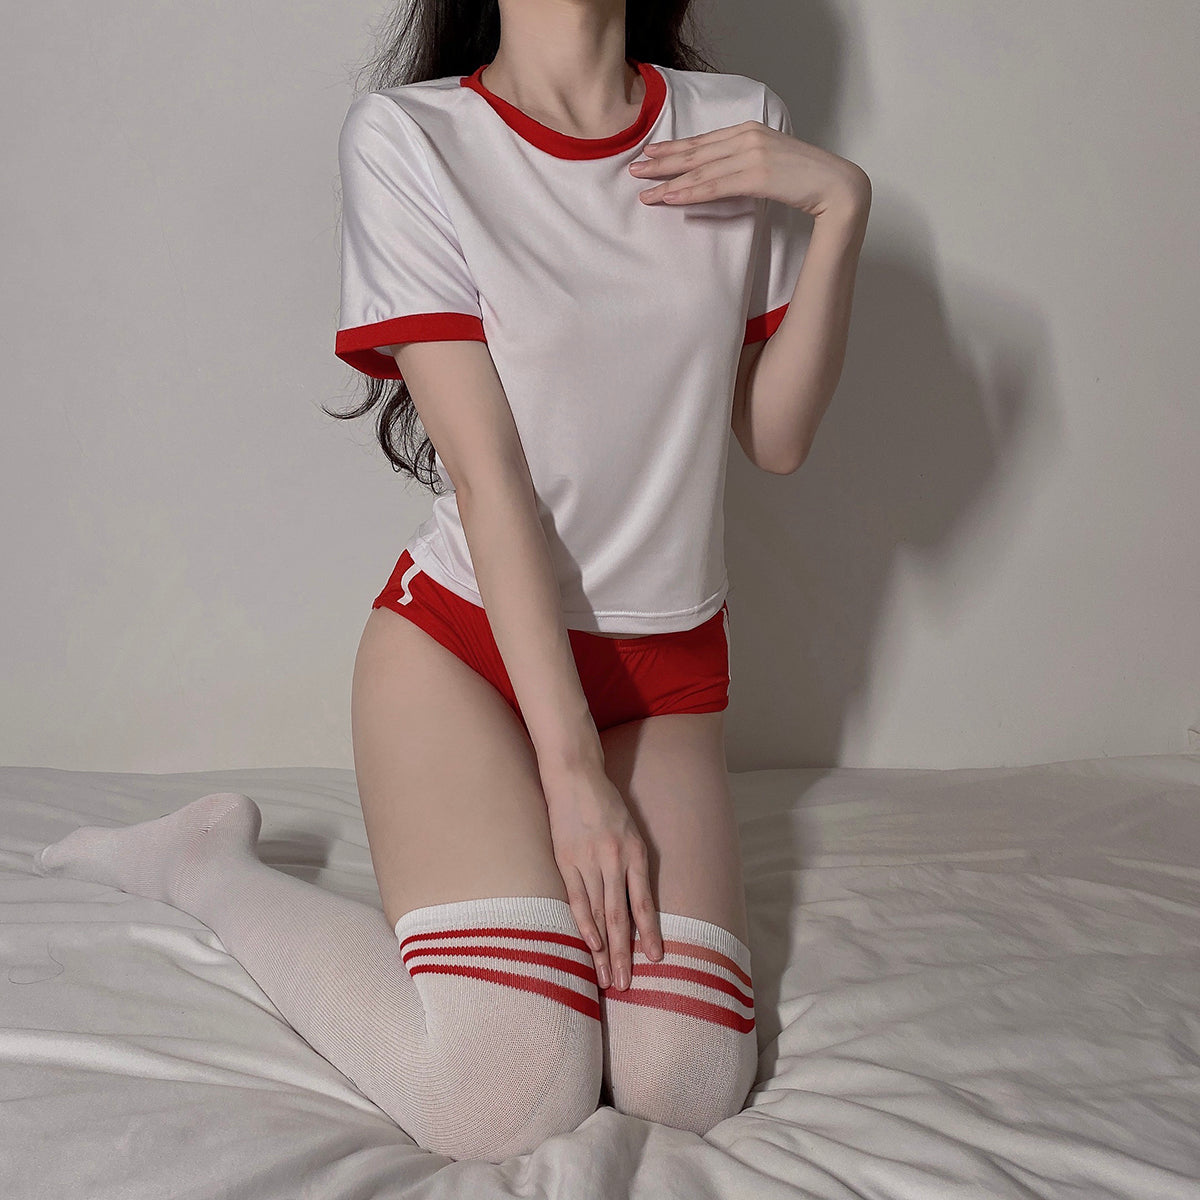 Japanese Anime Style Sexy Cheerleader Cosplay Costume in Red